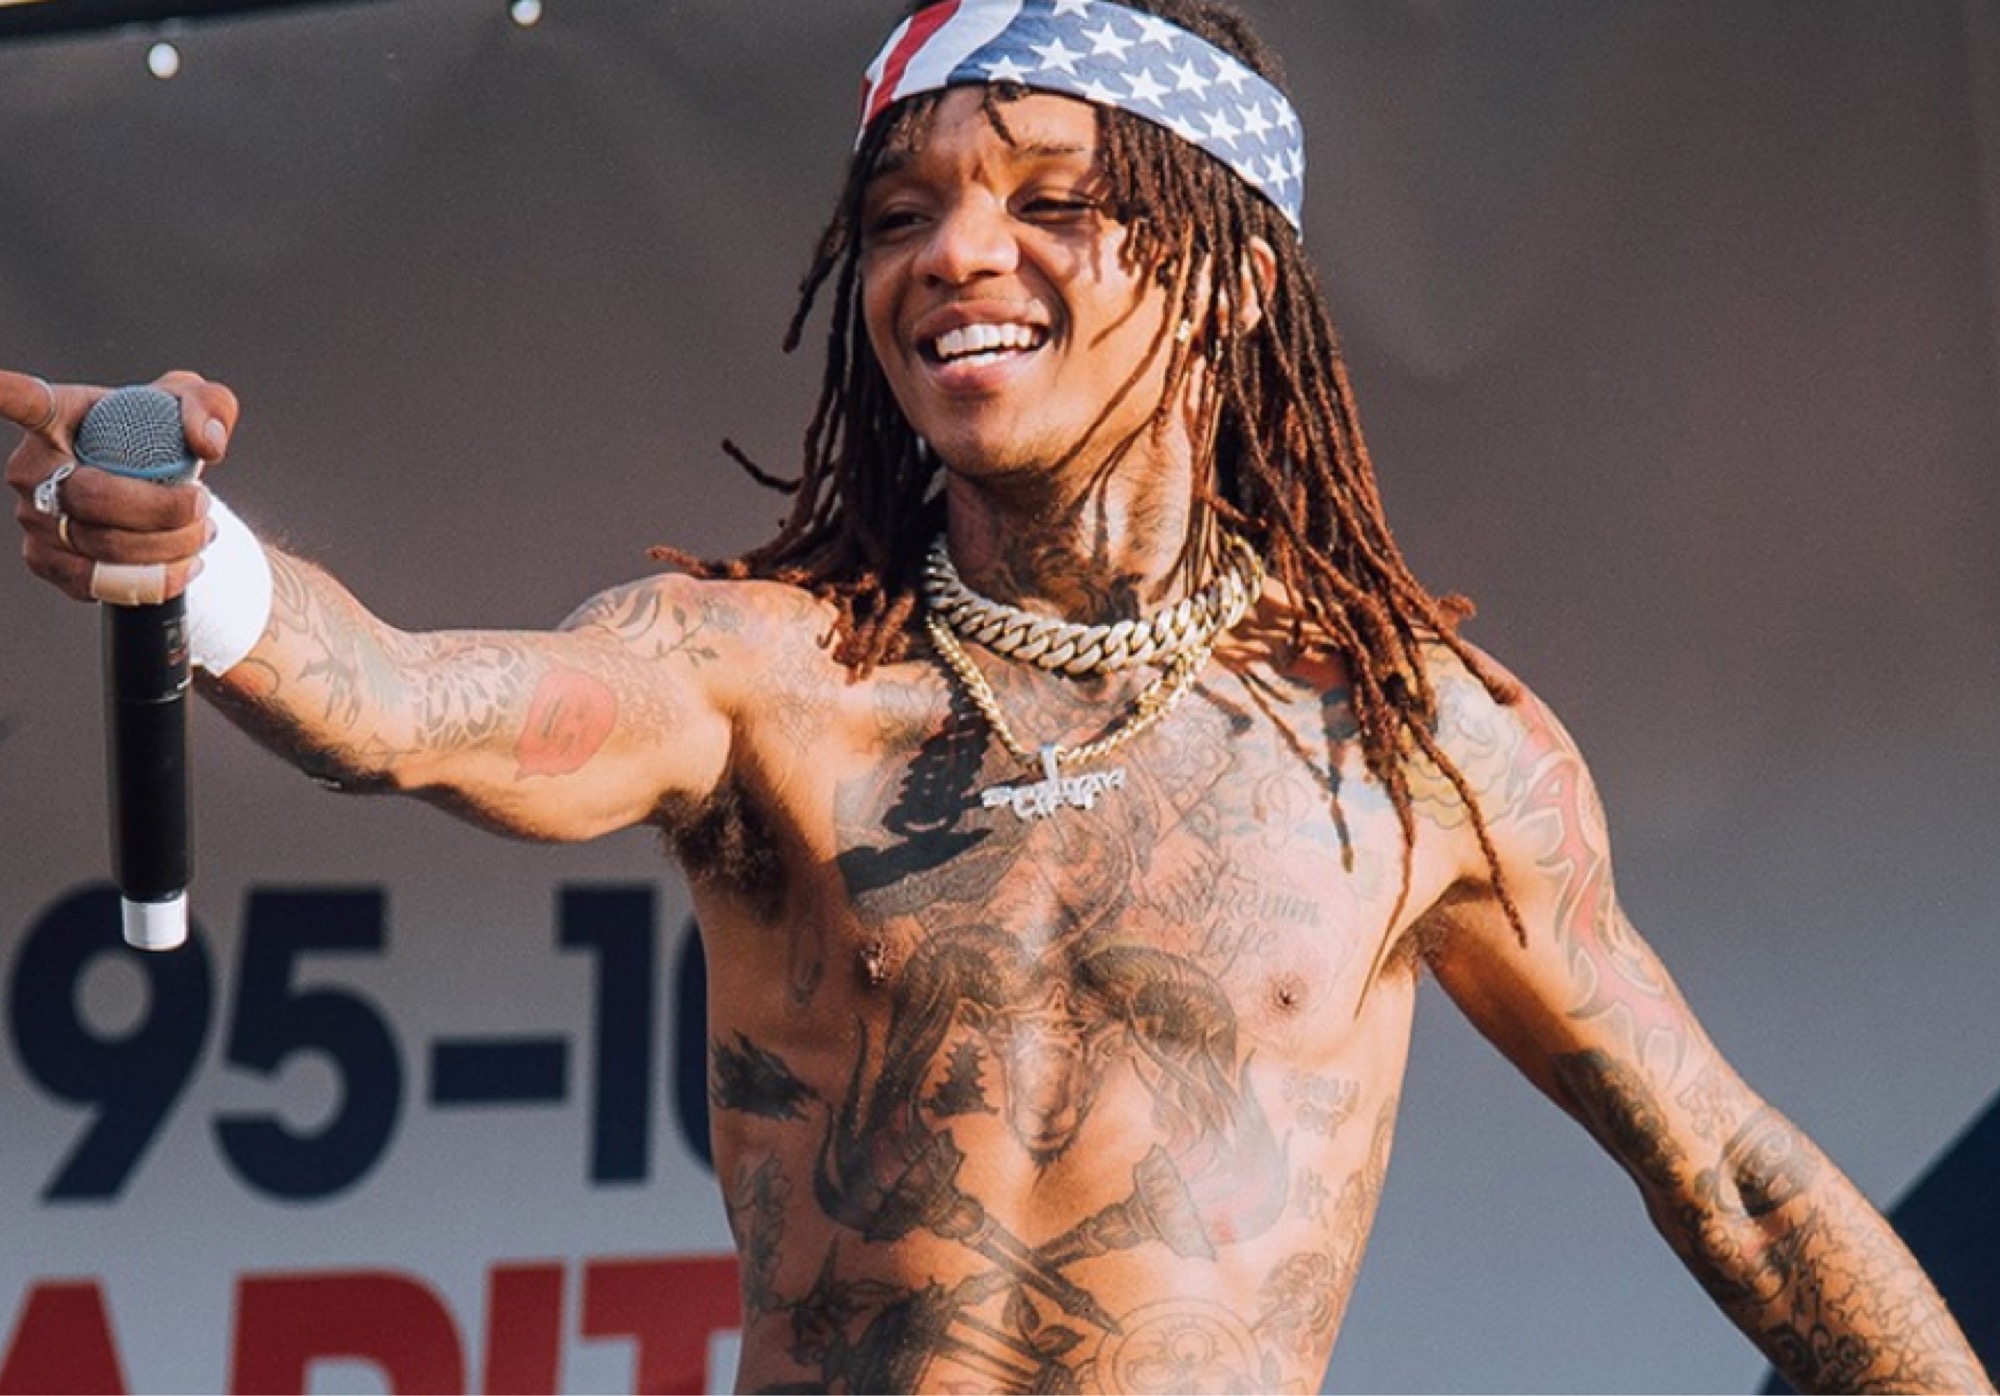 American Rapper Swae Lee’s DNA Results Confirms He Is Linked To Nigeria